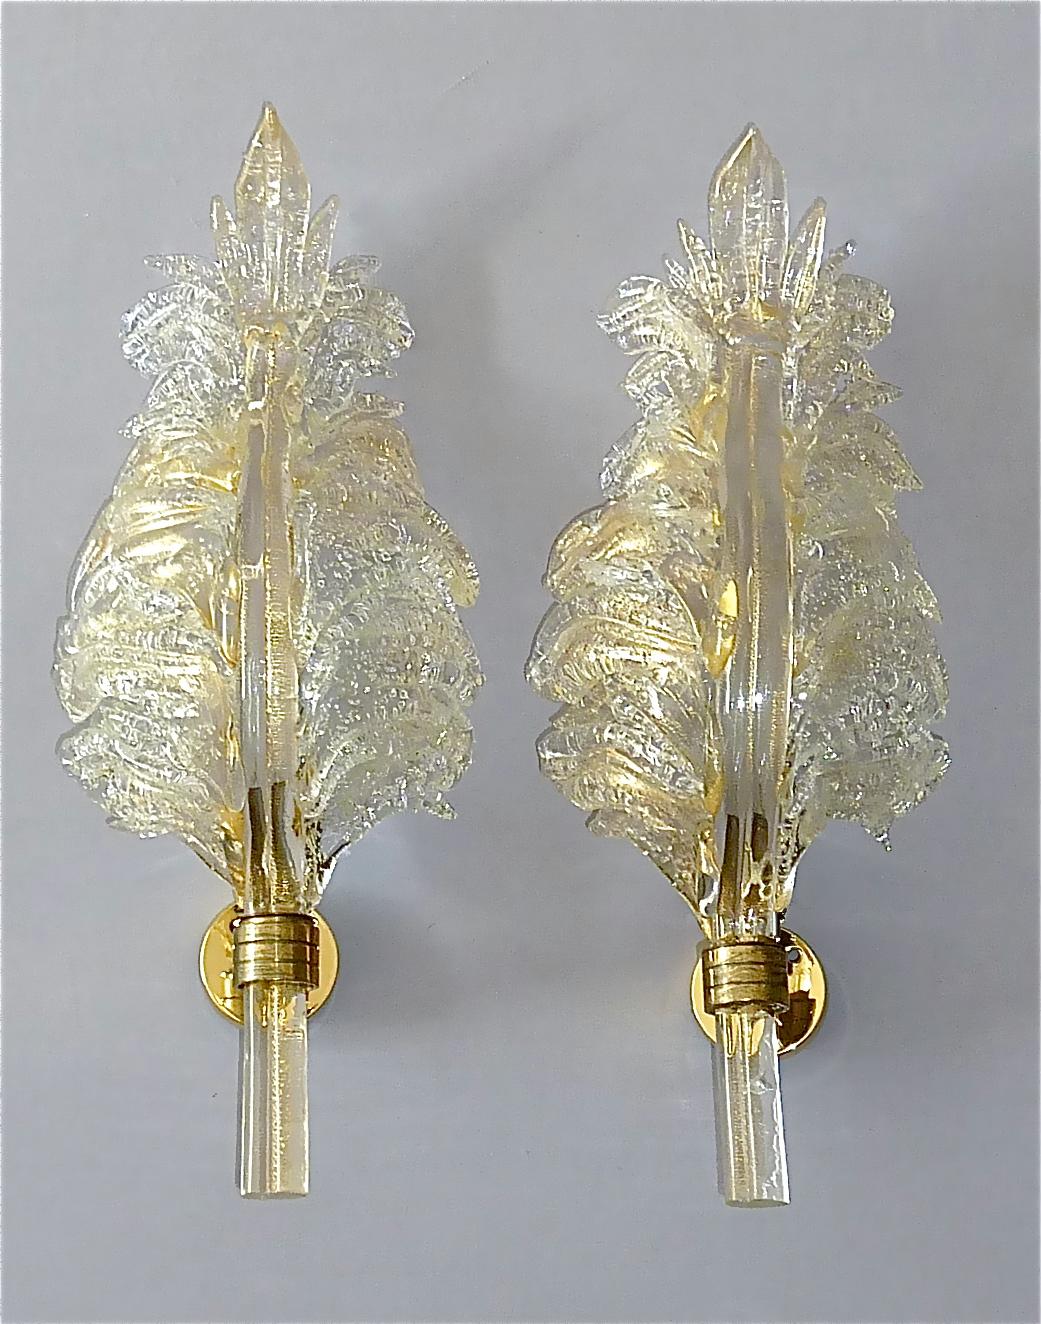 Fabulous pair of Barovier & Toso Murano art glass floral leaf sconces or wall lights, Italy, circa 1970s. They have a beautifully hand-crafted floral leaf shape and they are made in 